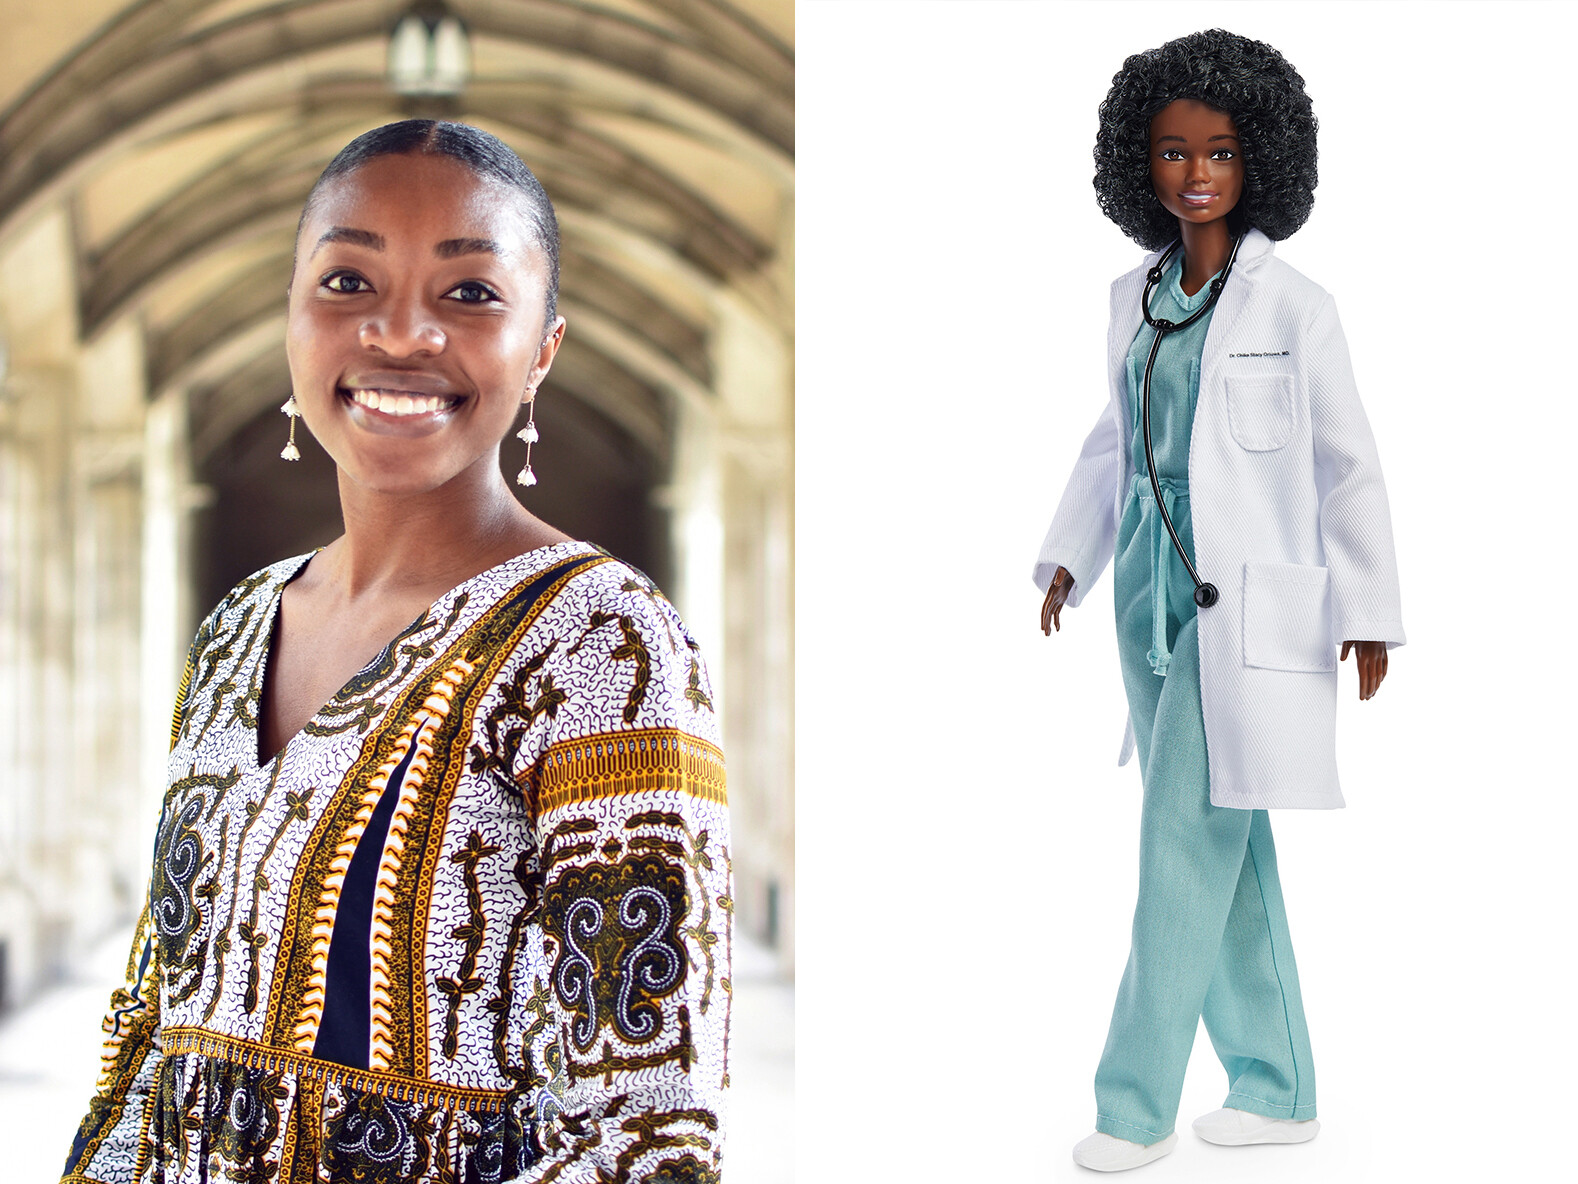 Photo of Chika Stacy Oriuwa and a Barbie doll made in her likenes. The doll is Black, and dressed in medical scrubs and a white coat.